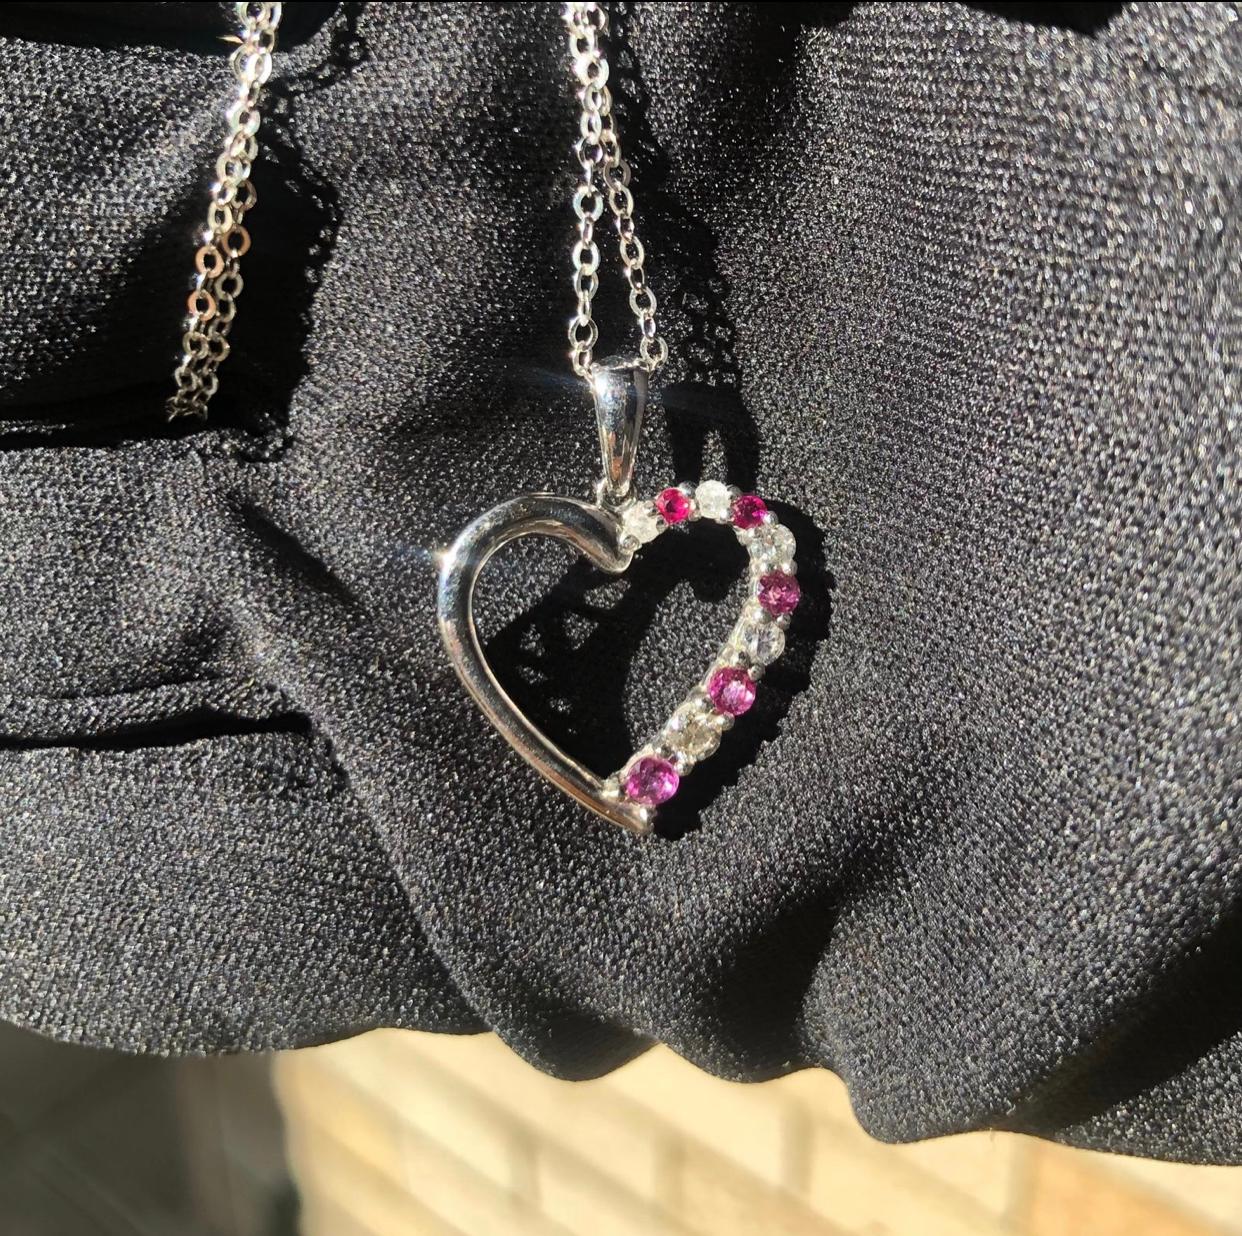 Cute diamond heart pendent. 

Approx. 3/4 carat total weight of natural genuine earth mined diamonds and rubies. The gemstones sparkle beautifully in the light. 

Pendent is stamped 10k white gold and has all the visible markings. Comes with a